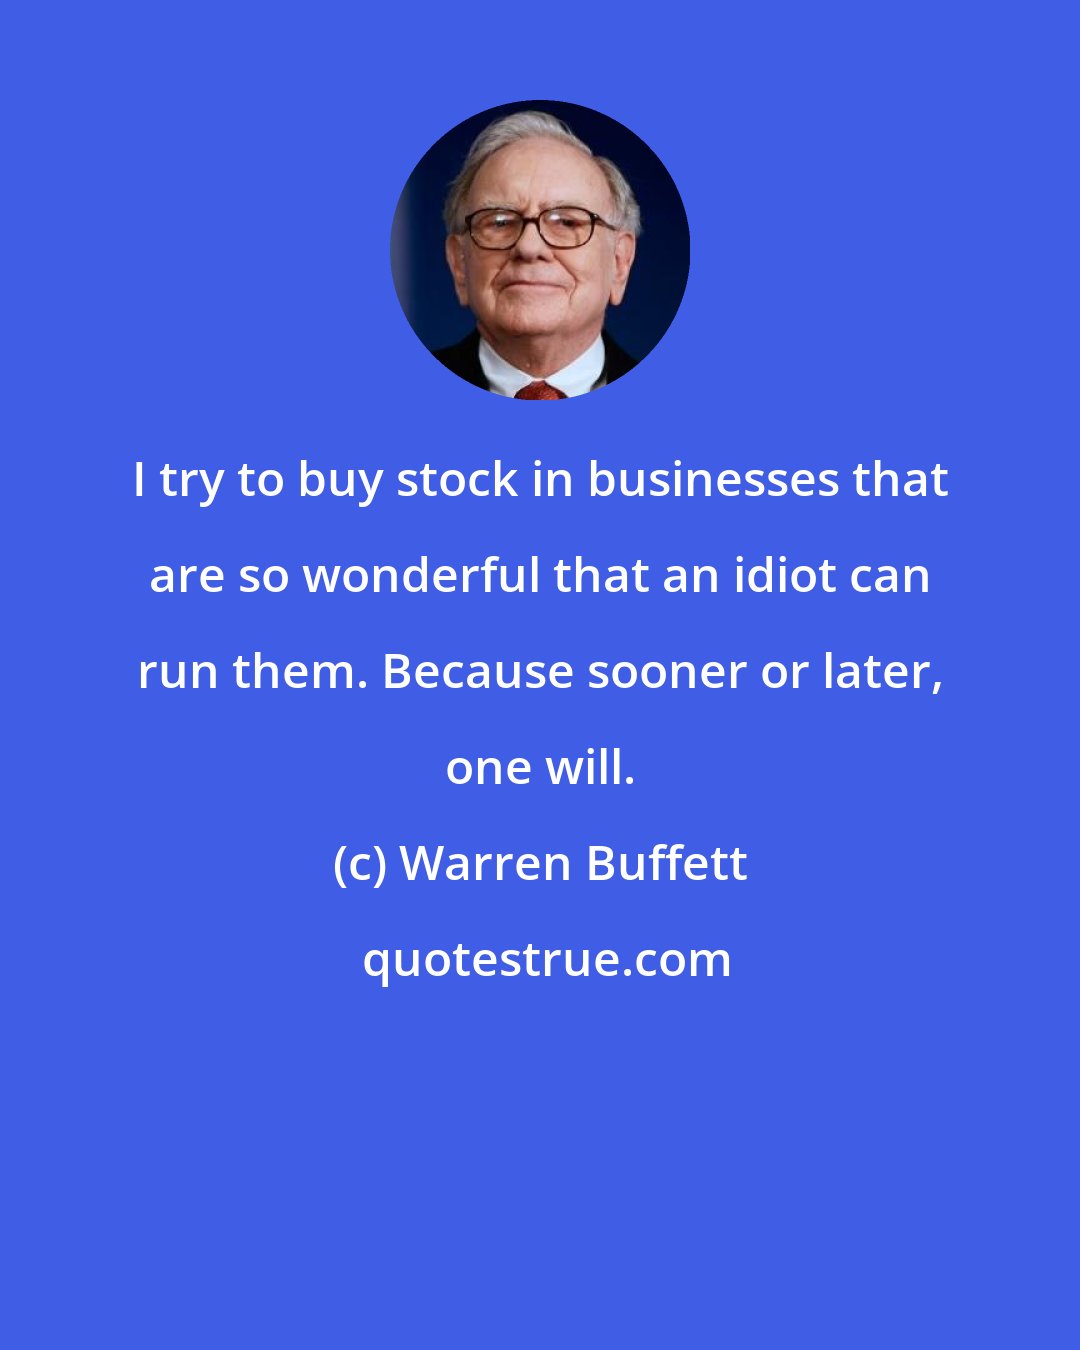 Warren Buffett: I try to buy stock in businesses that are so wonderful that an idiot can run them. Because sooner or later, one will.